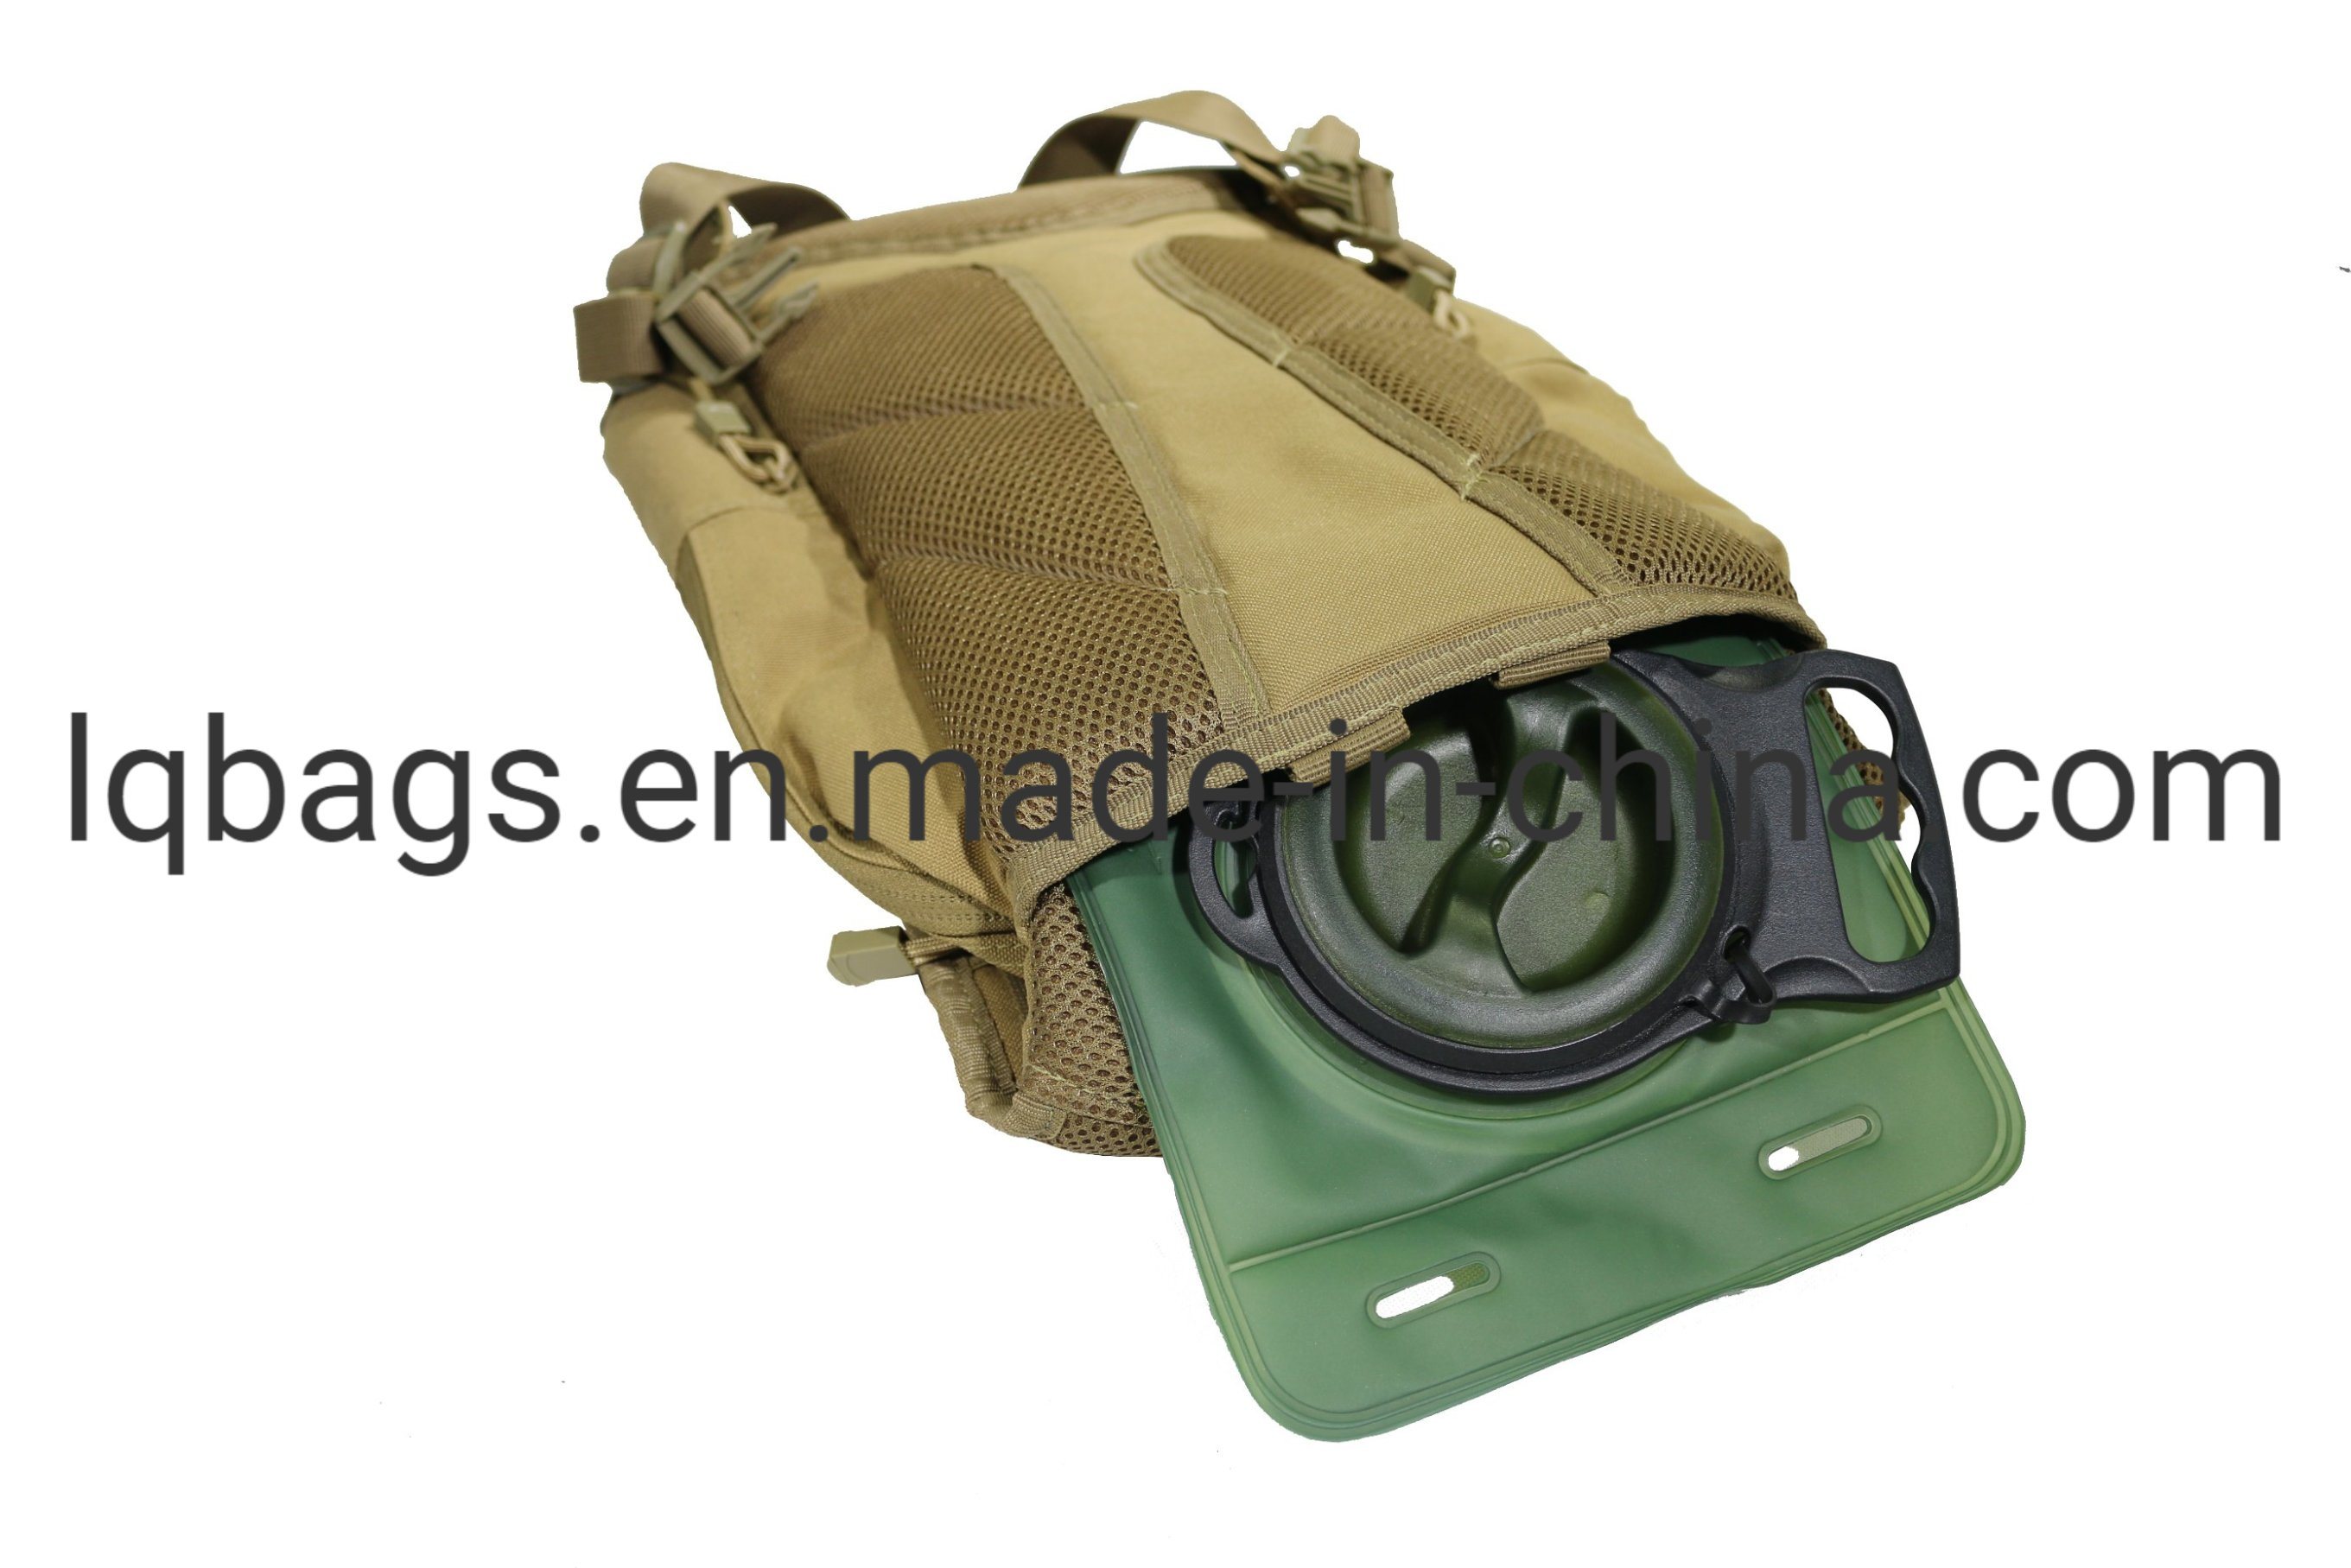 Tactical Hydration Backpack Molle Pack for Outdoor